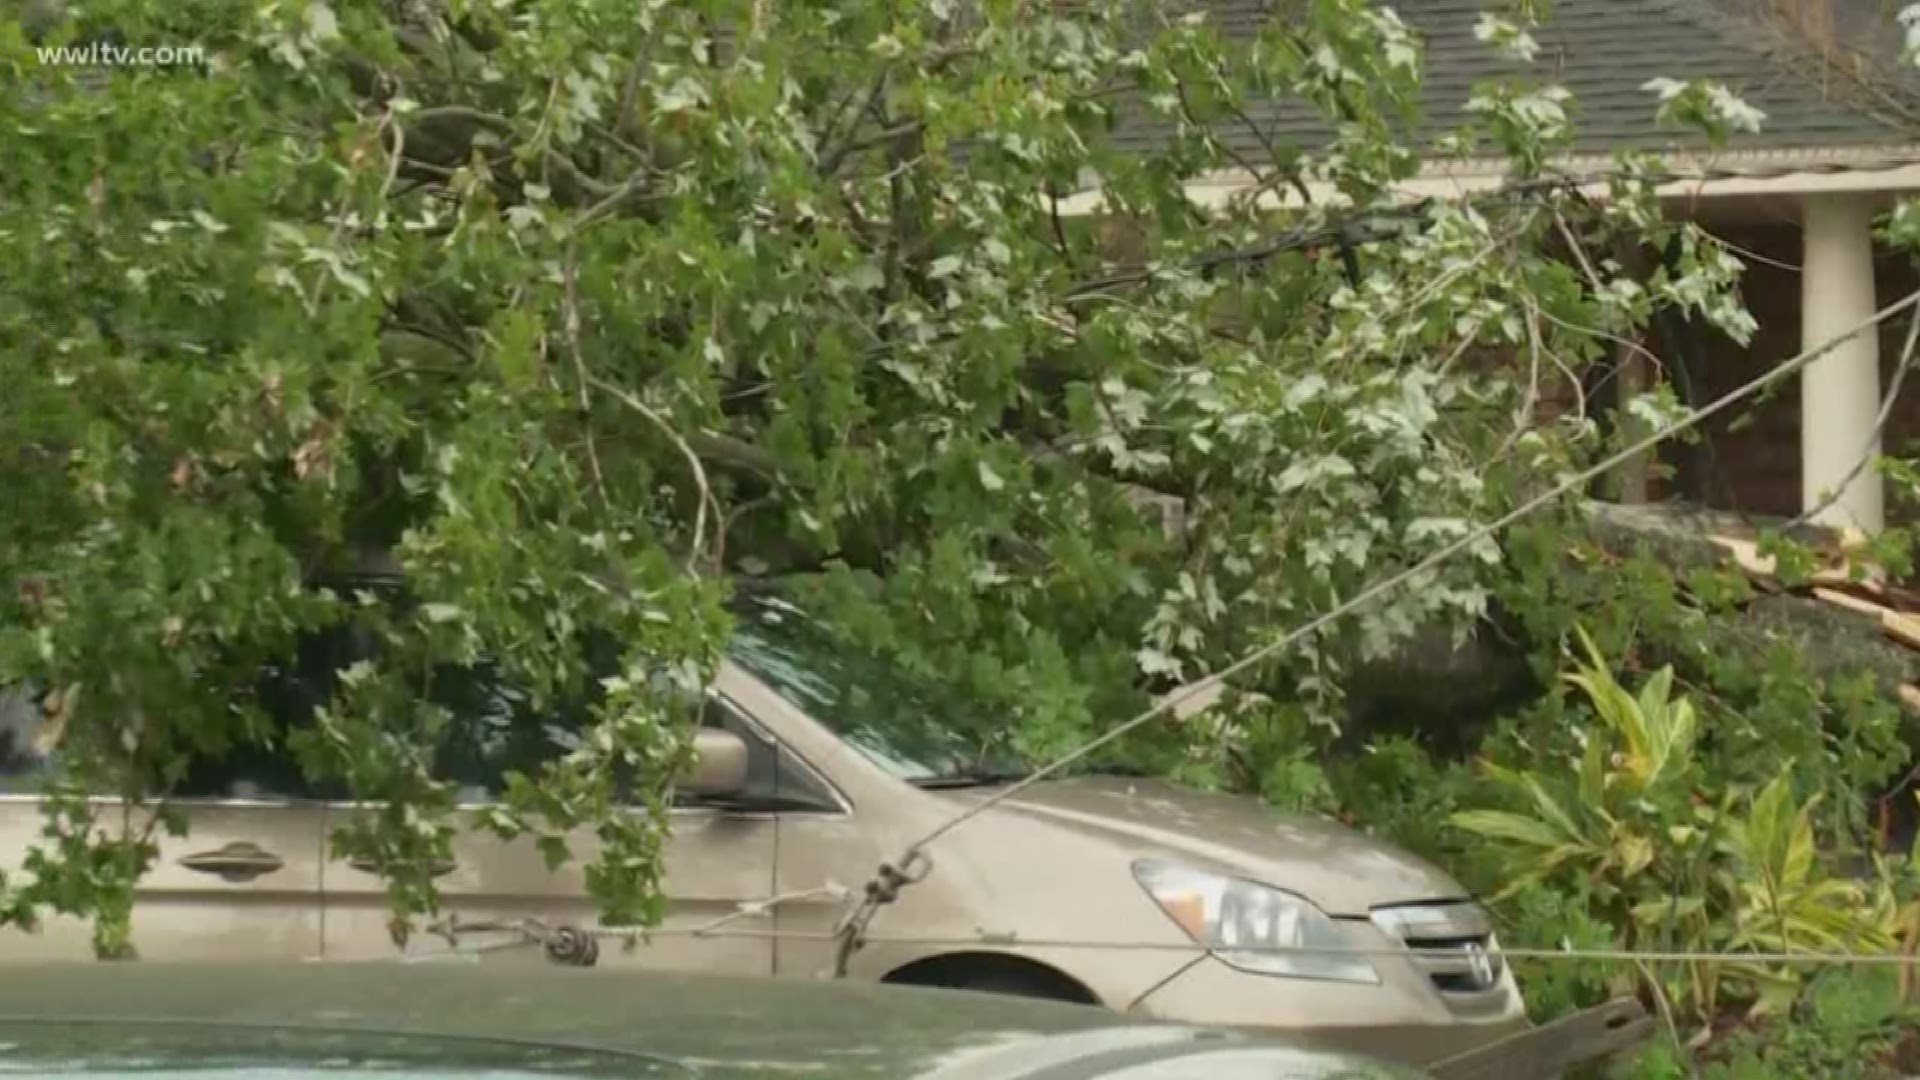 A tree and power pole were knocked over, knocking out power to about 100 buildings in Jefferson Parish Thursday morning.